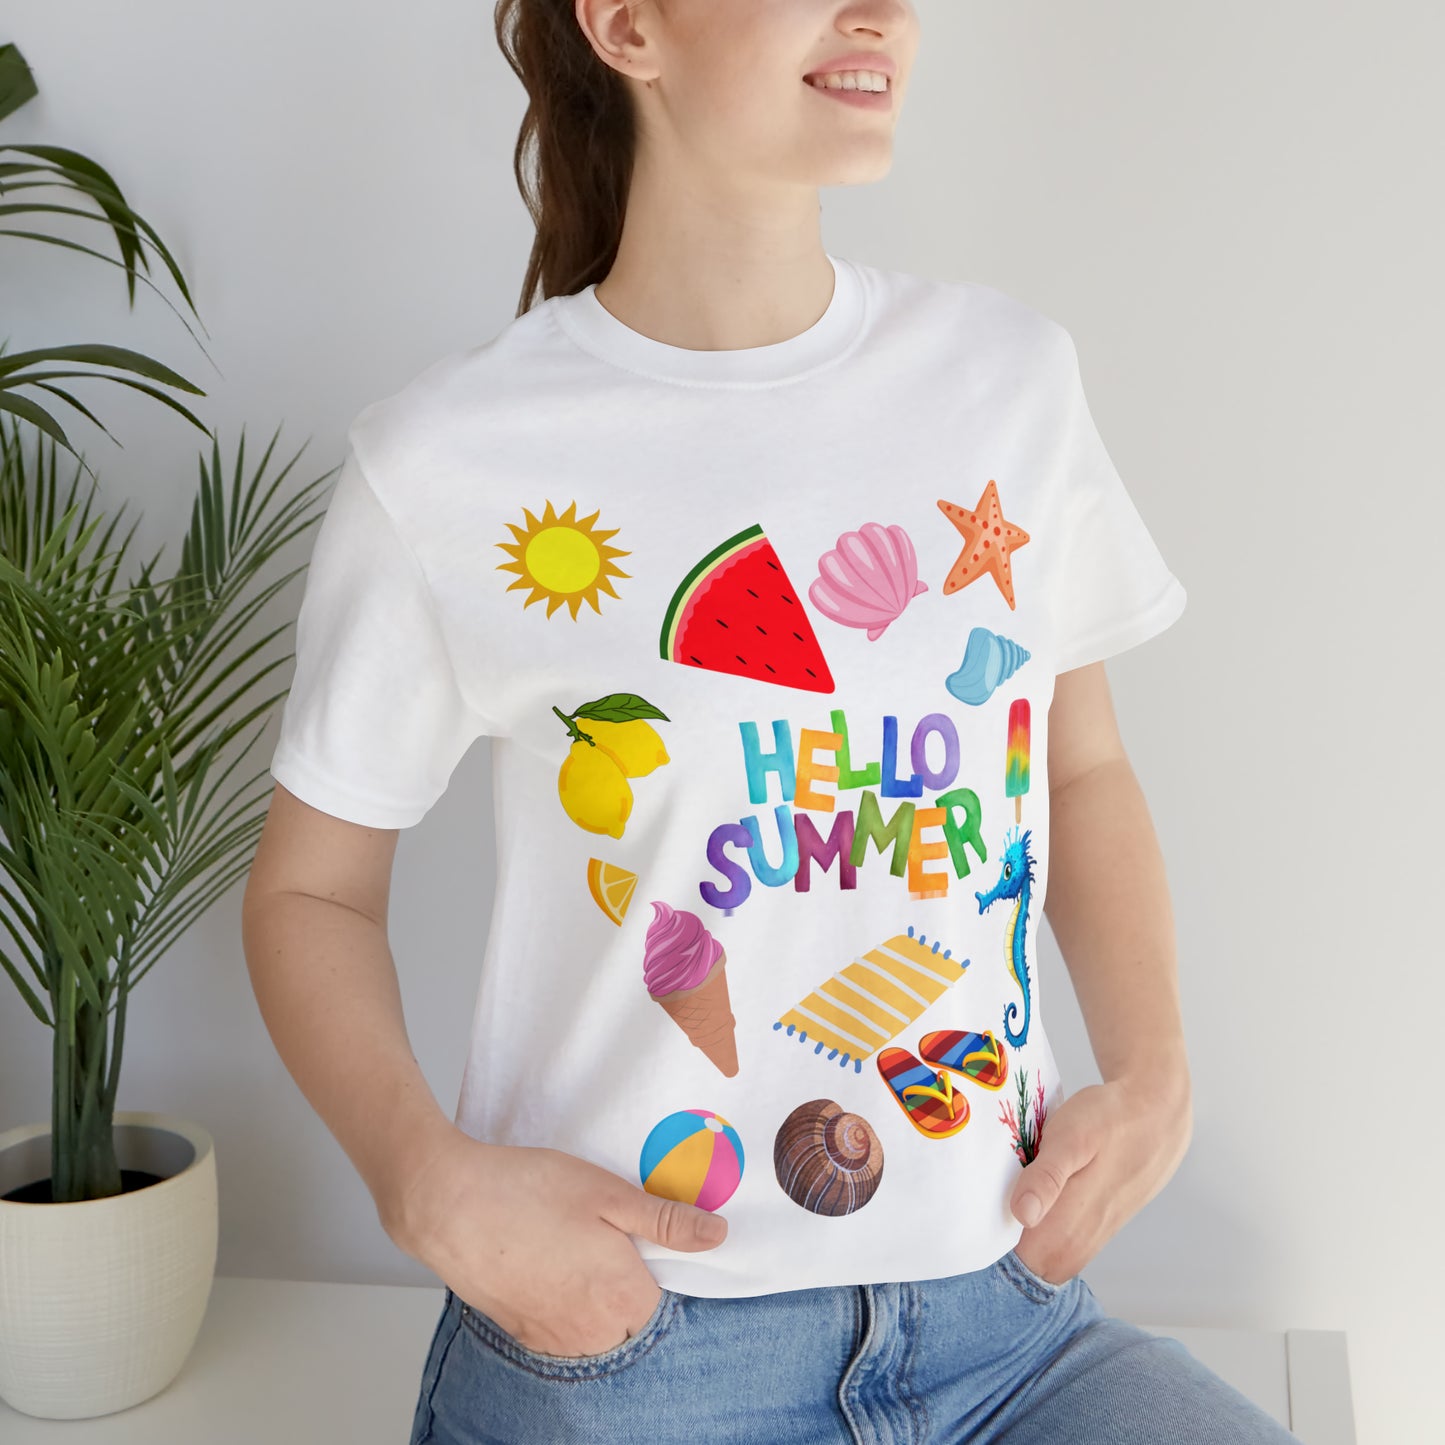 Hello Summer shirt, Funny Summer shirts for women and men, Summer Casual Top Tee